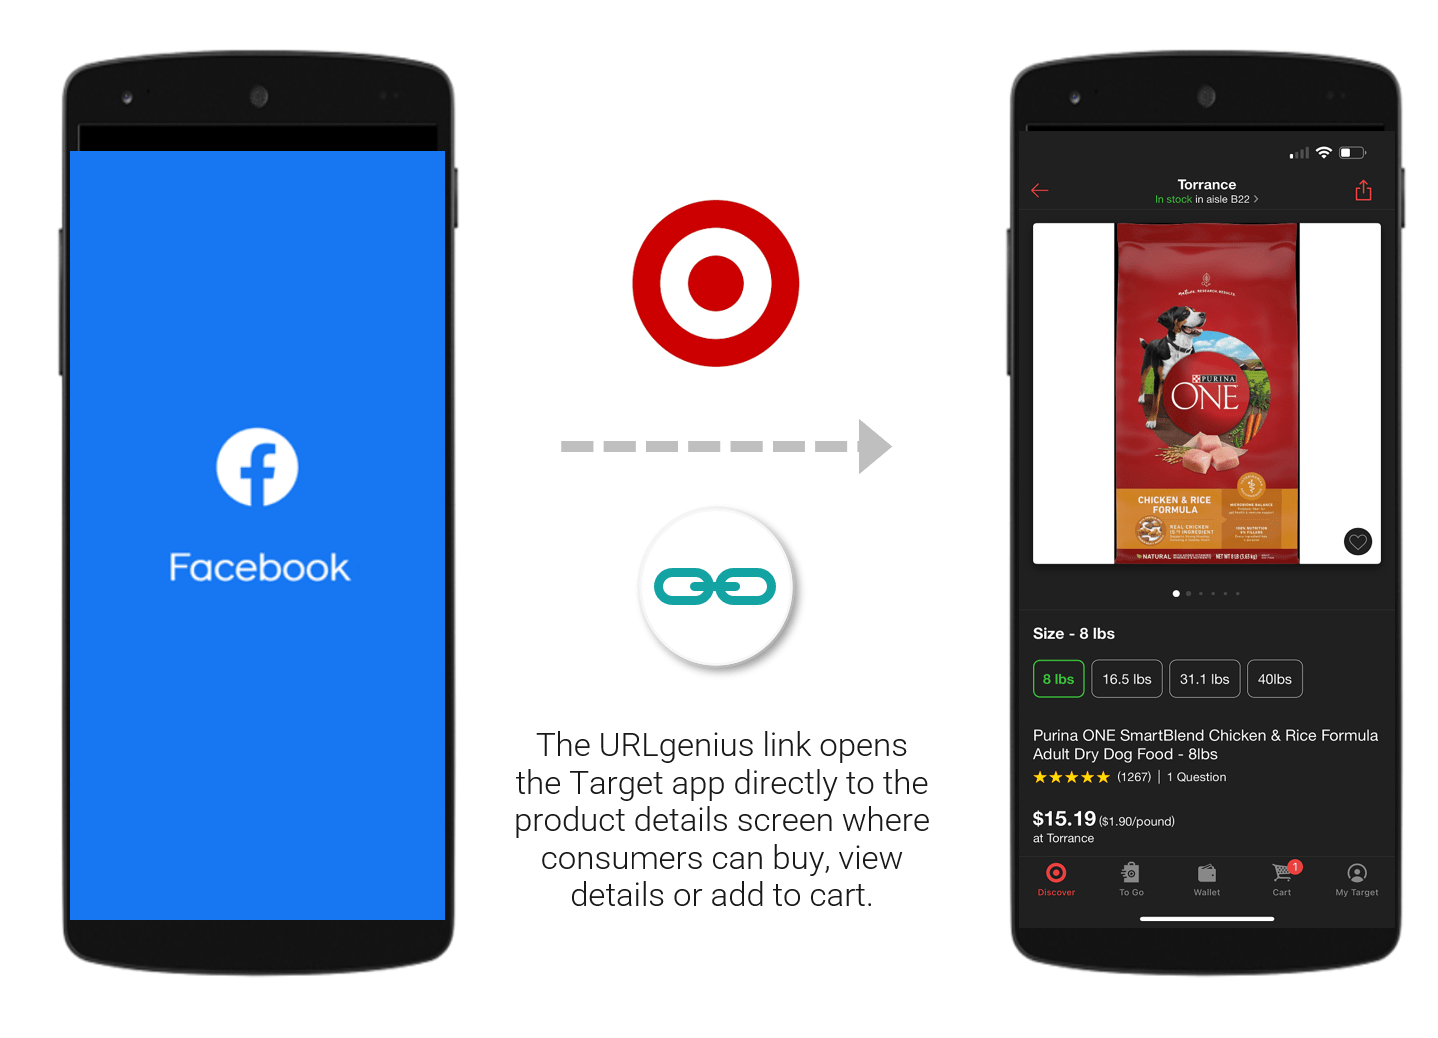 The URLgenius link opens the Target app directly to the product details screen where consumers can buy, view details, or add to cart